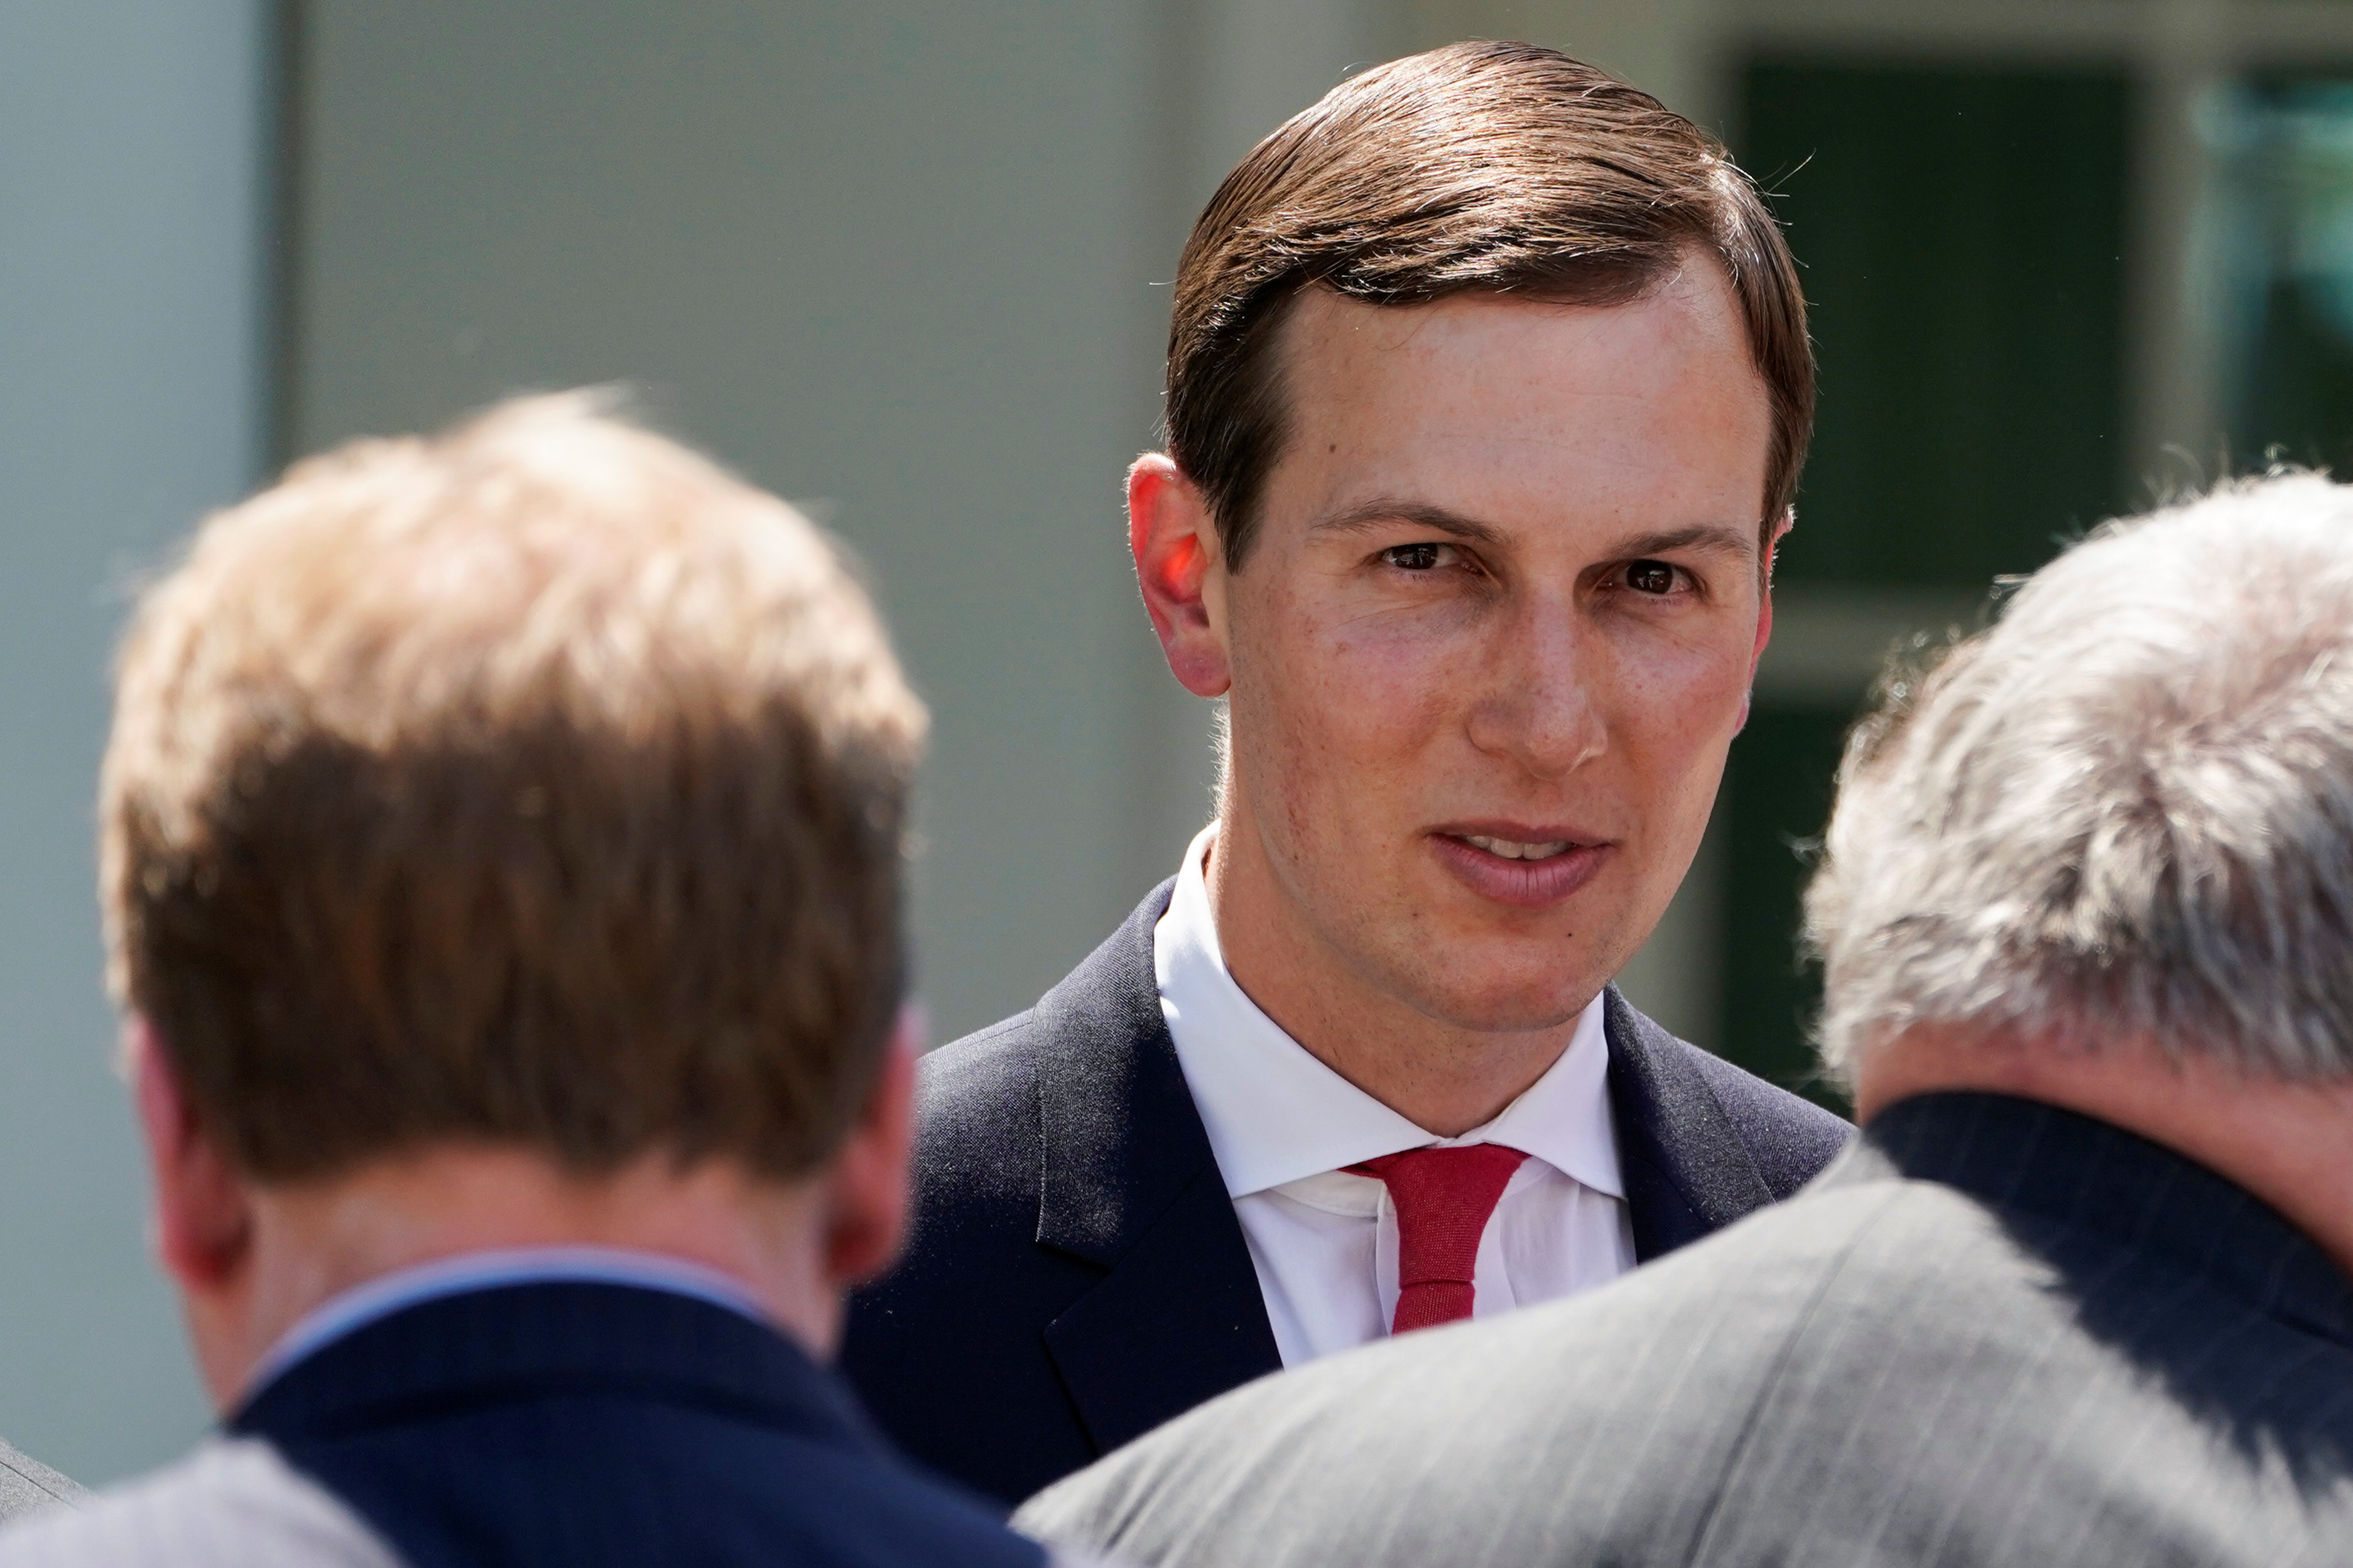 Senior White House Advisor Jared Kushner speaks with guests after U.S. President Donald Trump delivered remarks on immigration reform in the Rose Garden of the White House in Washington, U.S., May 16, 2019. REUTERS/Joshua Roberts